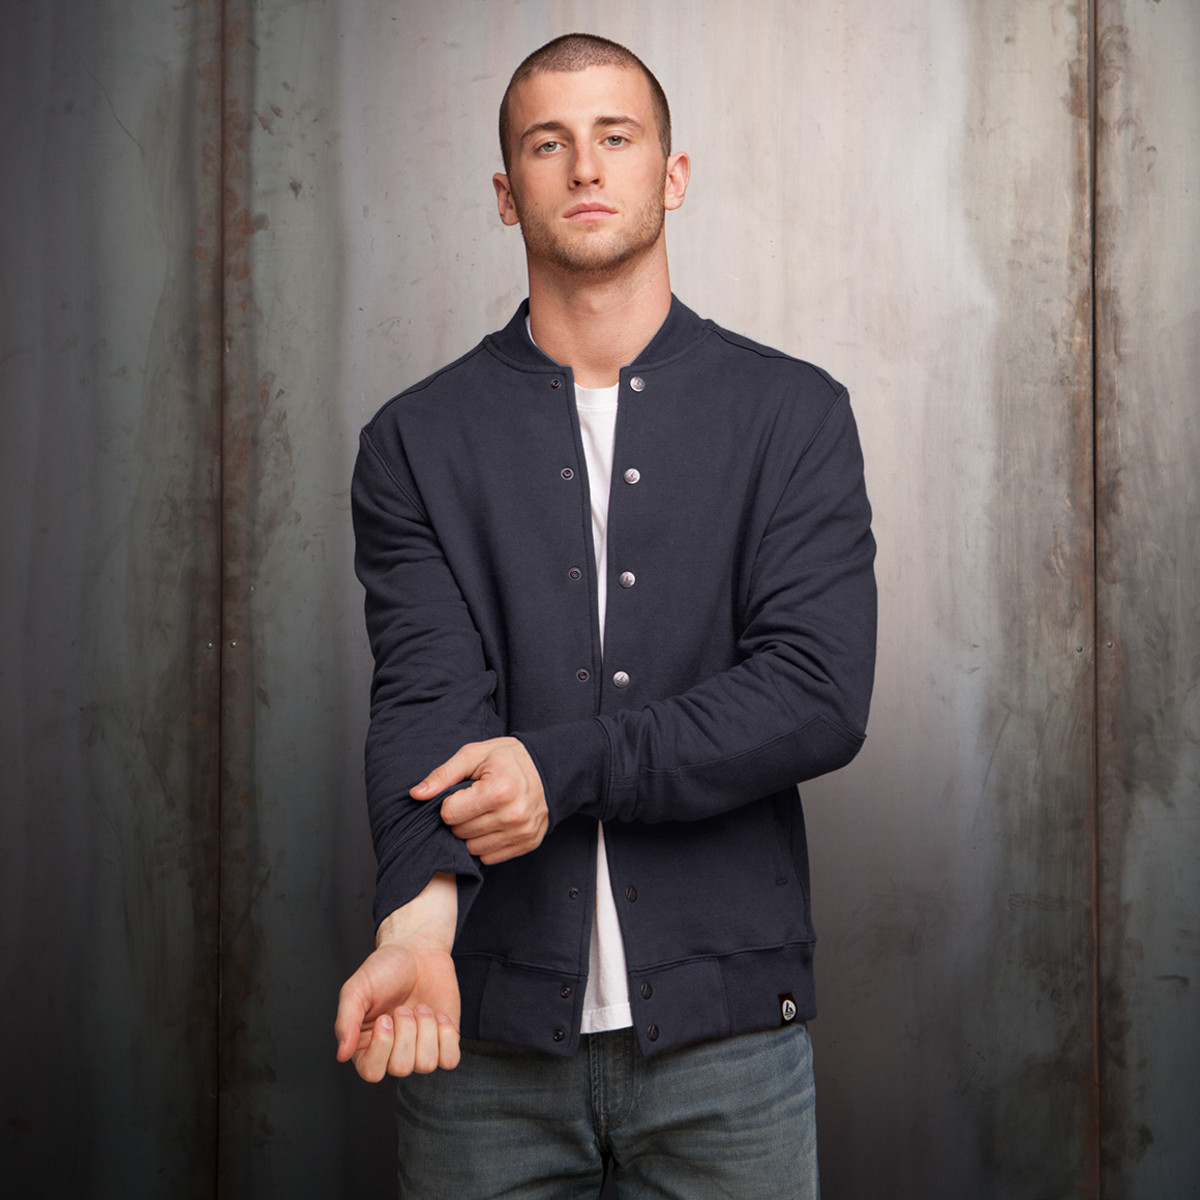 $89 Heavyweight Baseball Jacket From American Giant is The Best ...